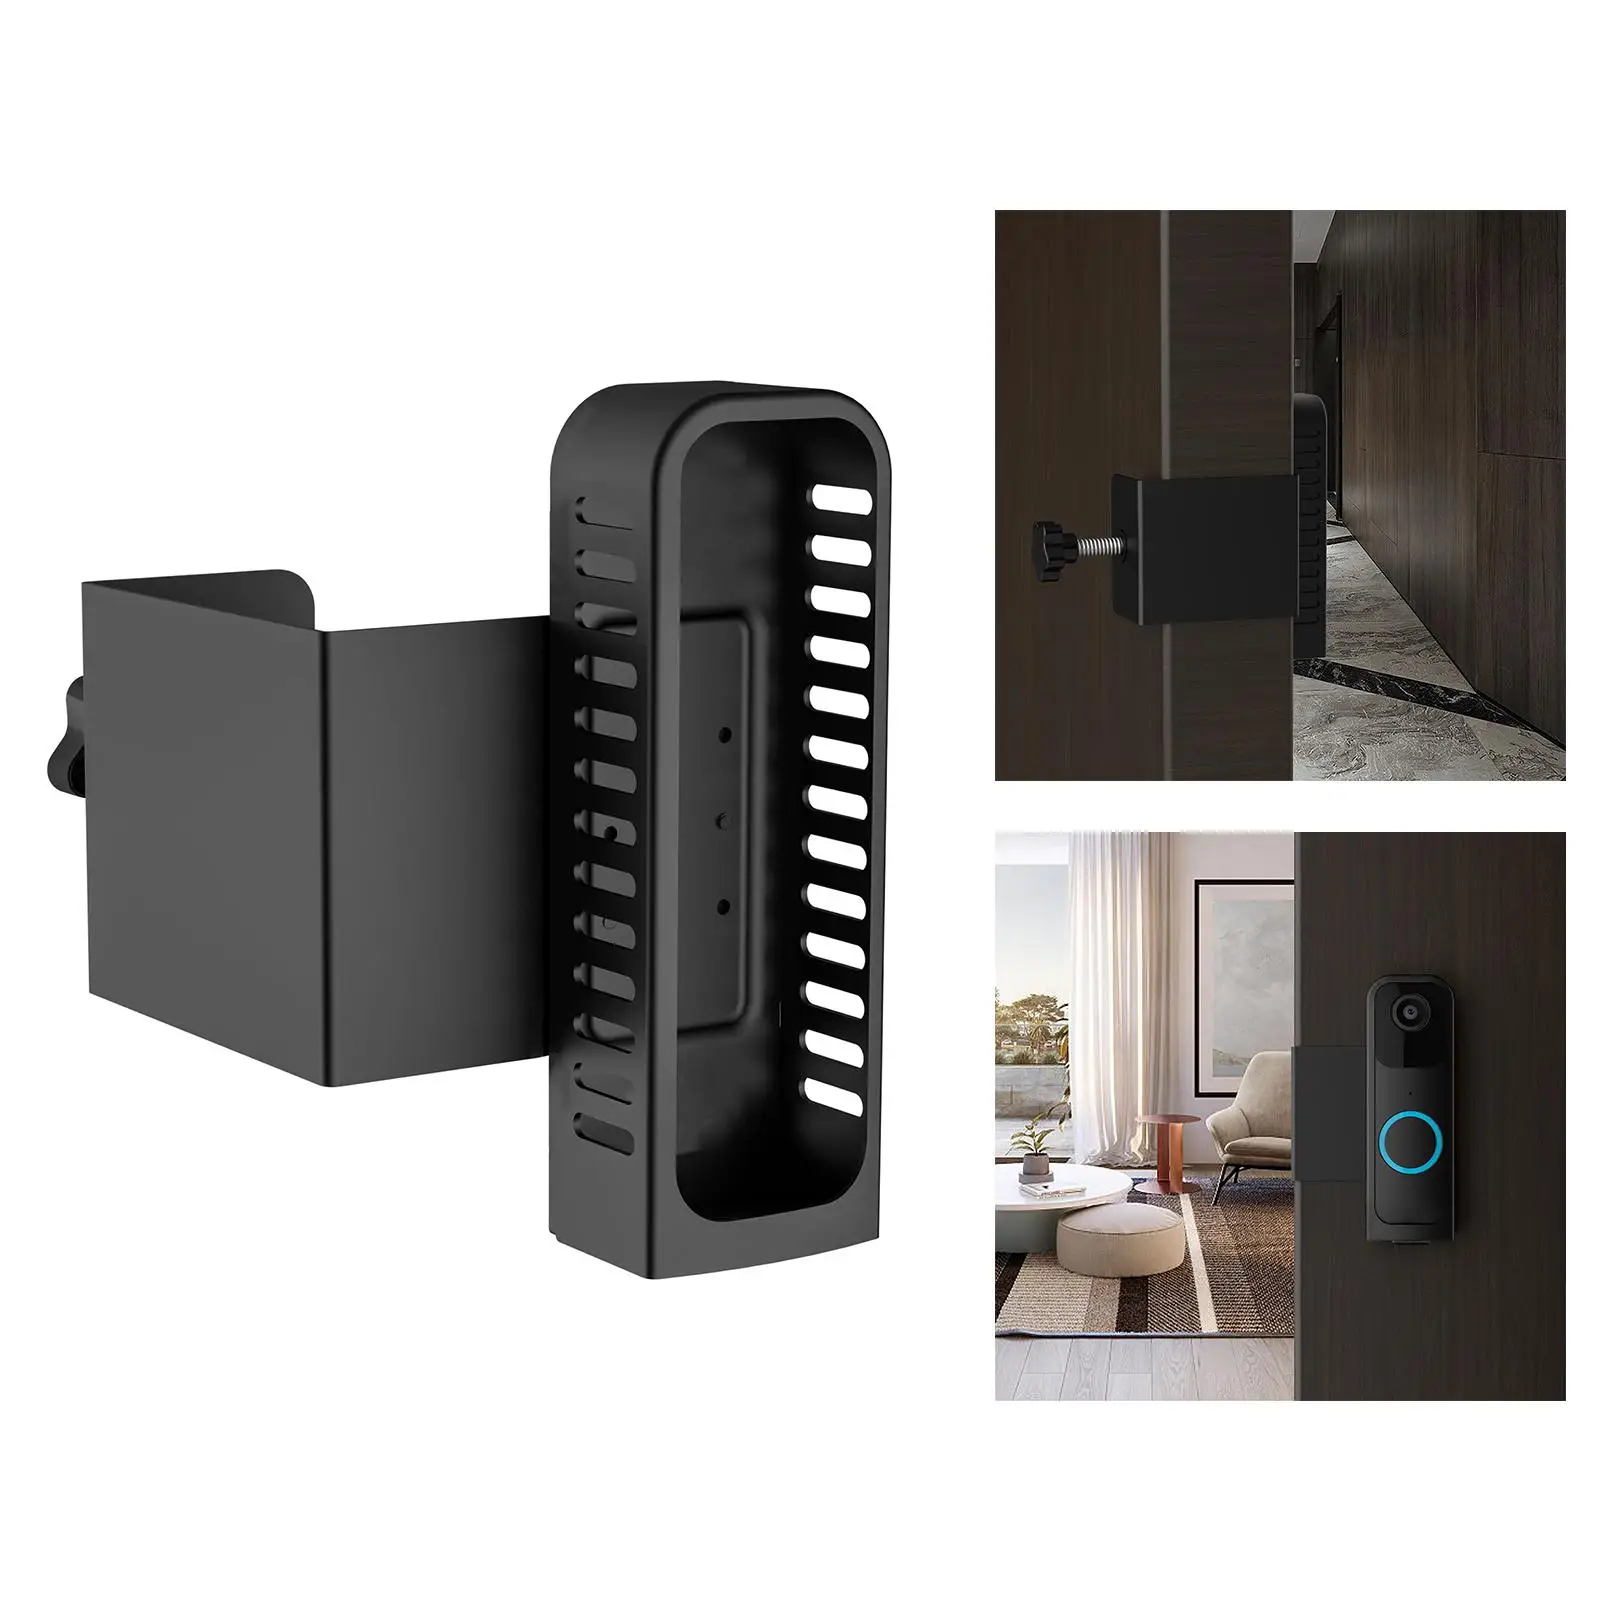 Video Doorbell Mount Protective Cover Easy Installation for Renters Room